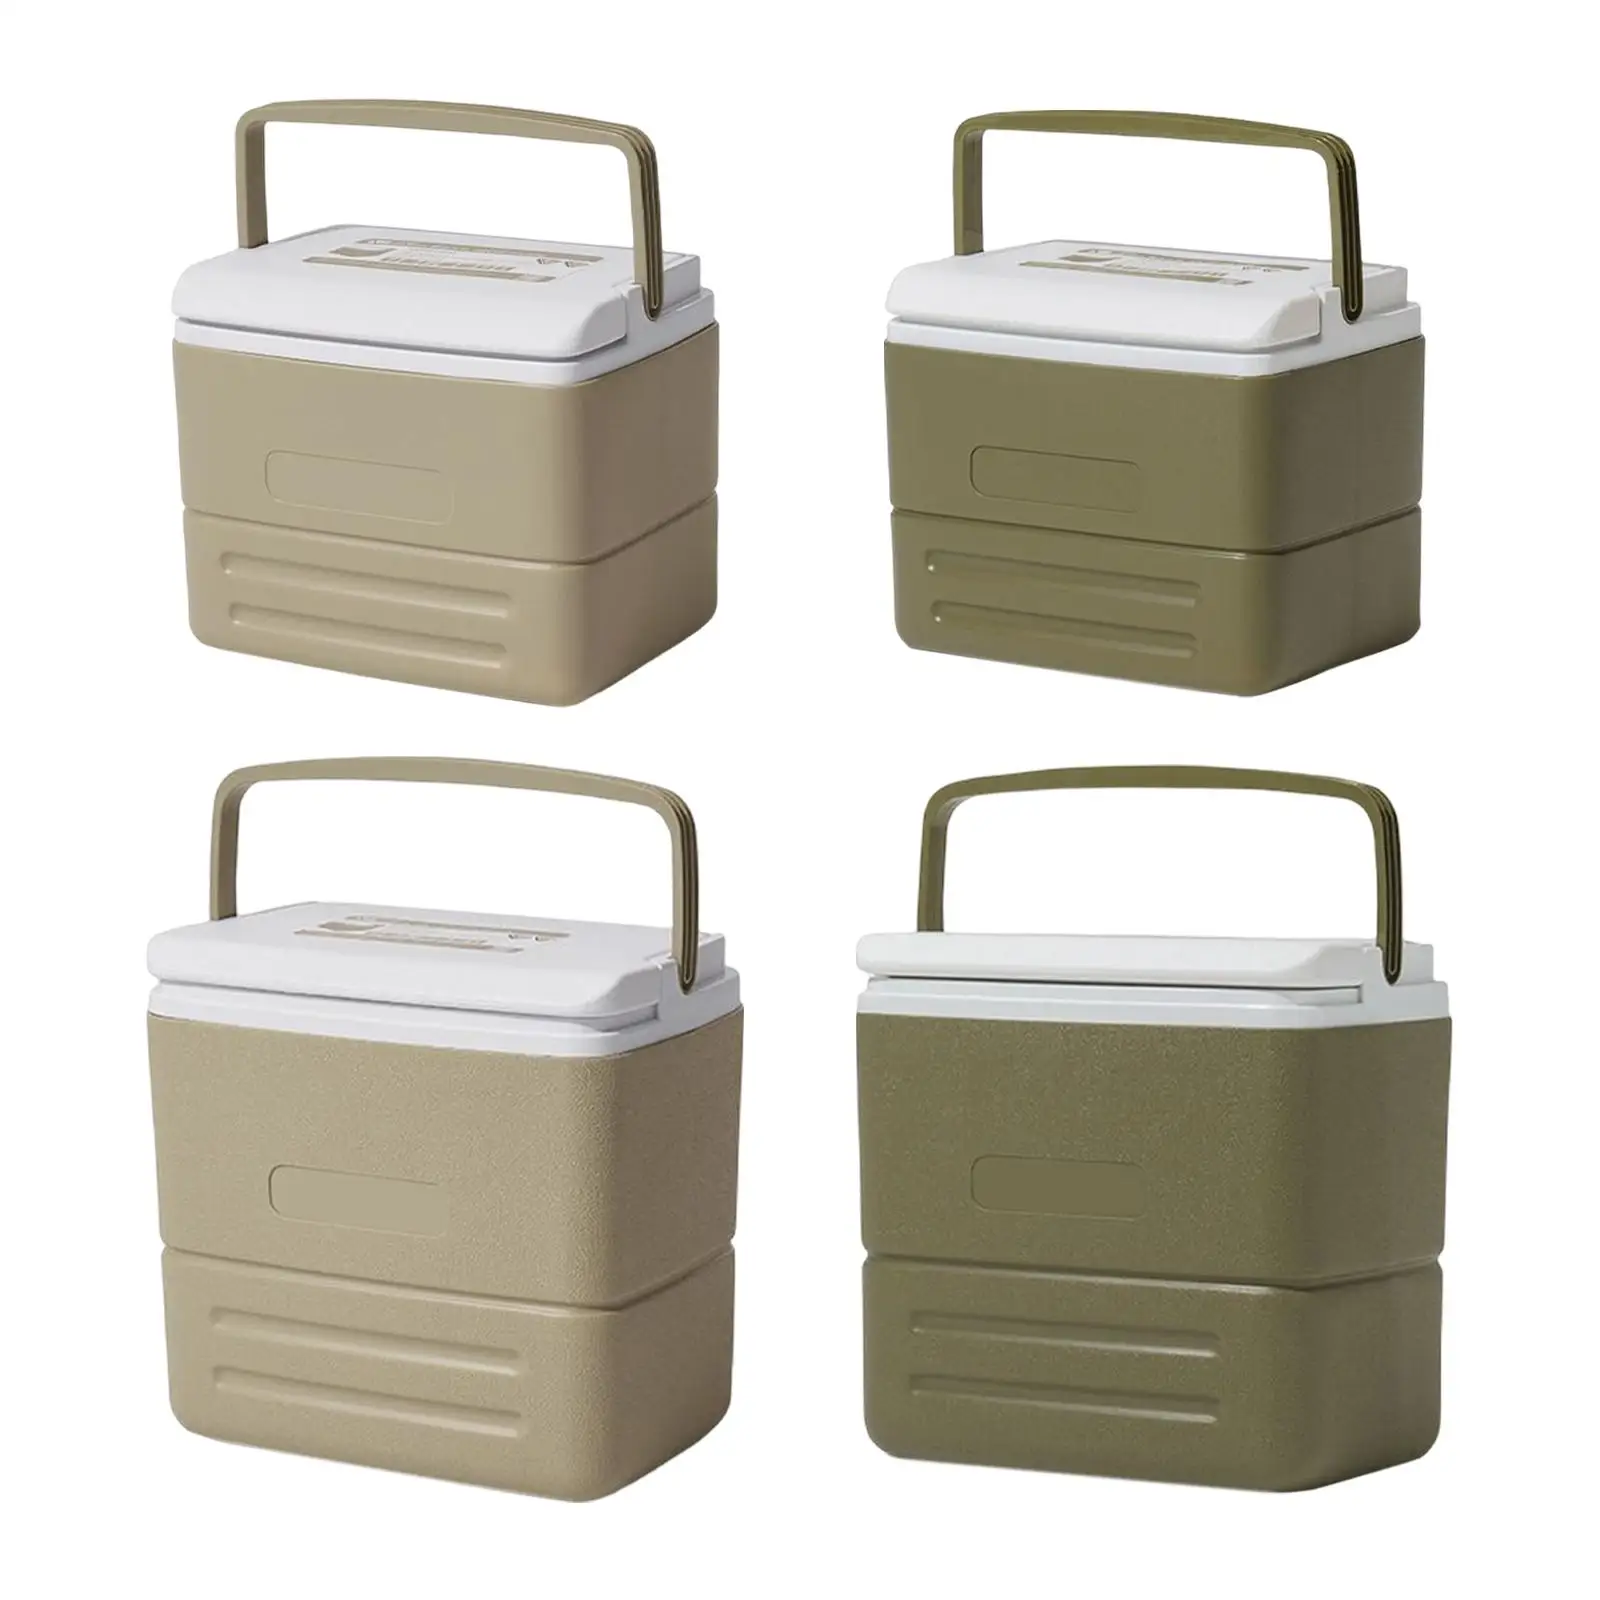 Cooler Bag Storage Freezer Food Delivery Catering Therma Fridge Insulated Thermal Lunch Box for BBQ Van Boat Kayaking